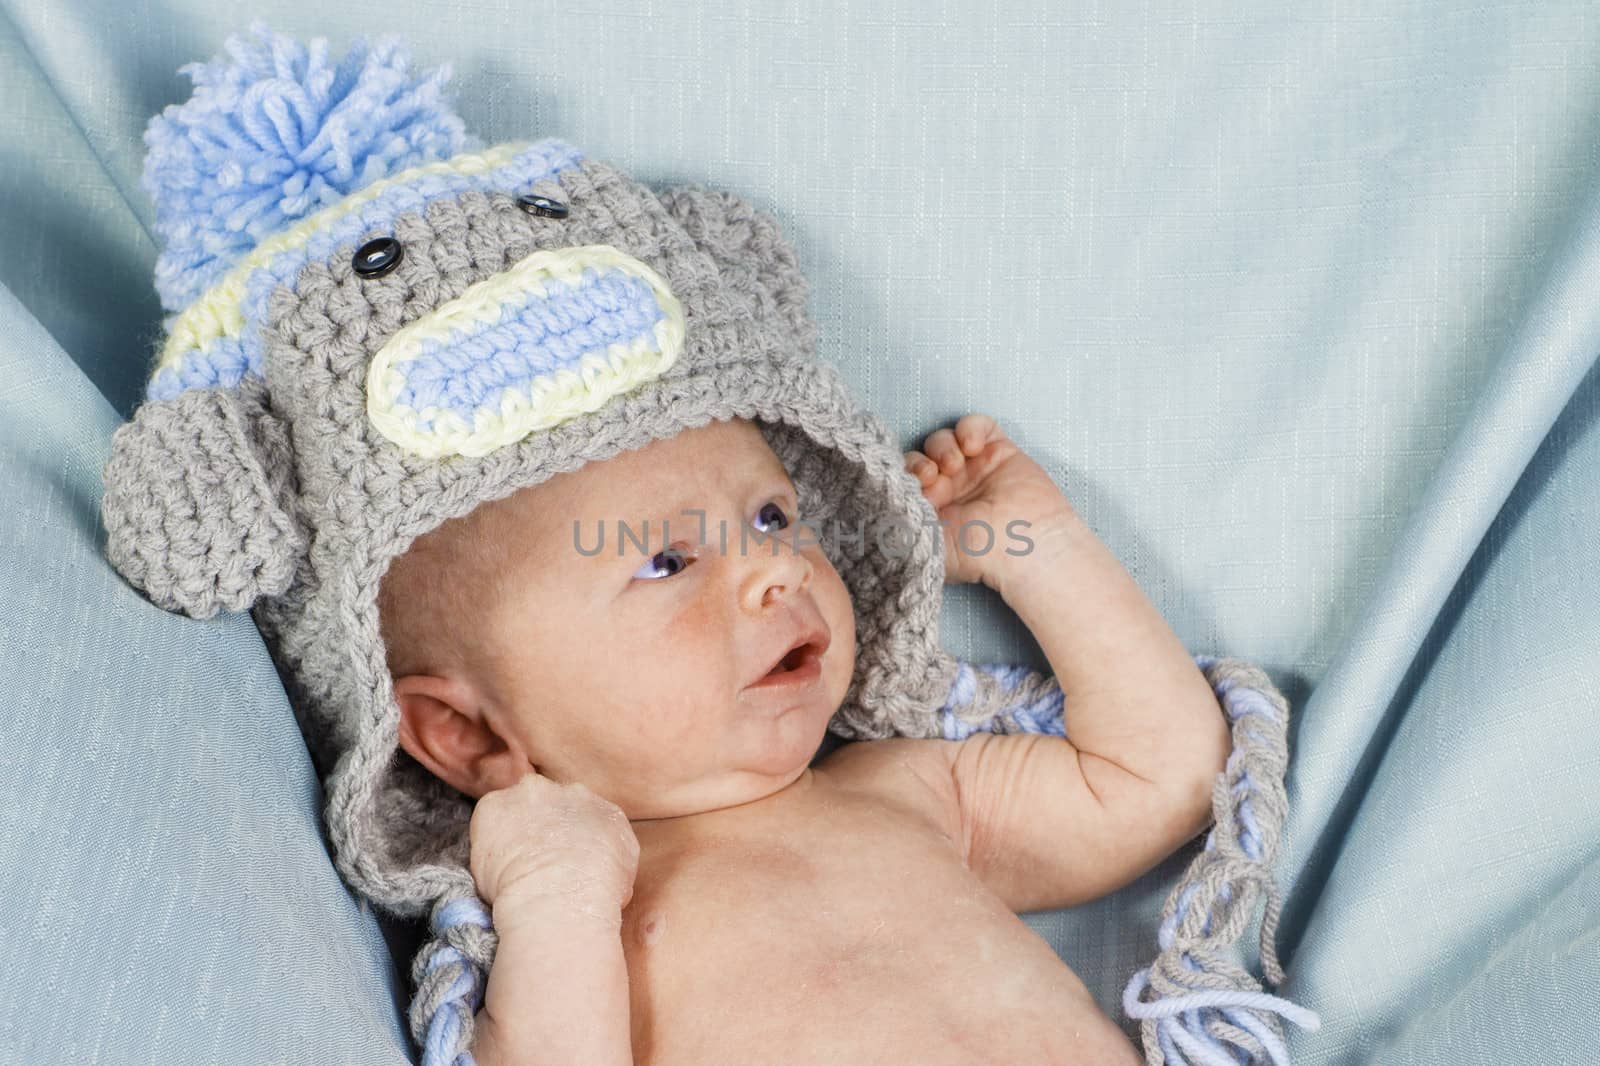 A newborn boy wearing a knitted hat laying on a blue blanket.